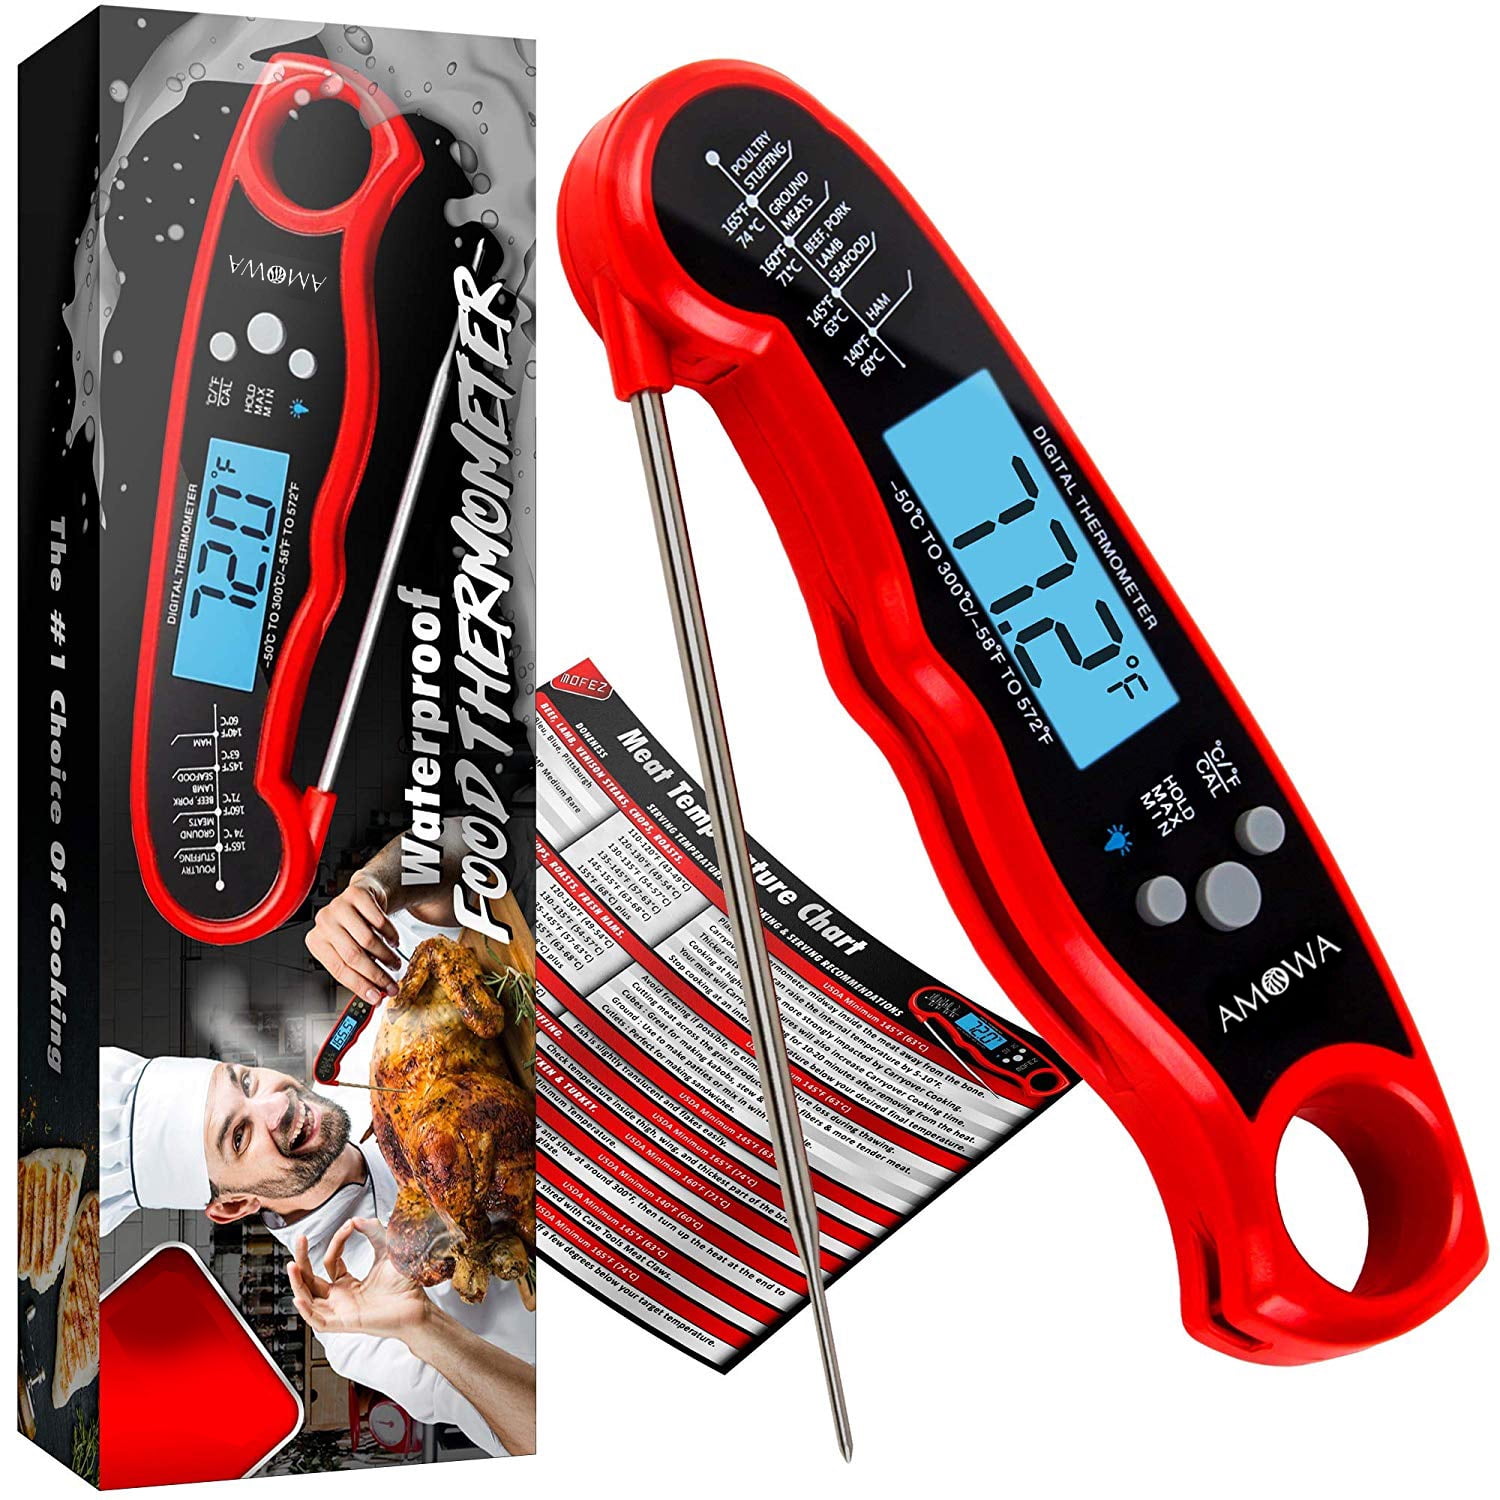 BBQ Thermometer Candy BBQ Digital Meat Thermometer Grill Waterproof Digital Instant Read Meat Thermometer with Calibration Function Back-lit Digital BBQ thermometer for Milk,Outdoor Cooking 